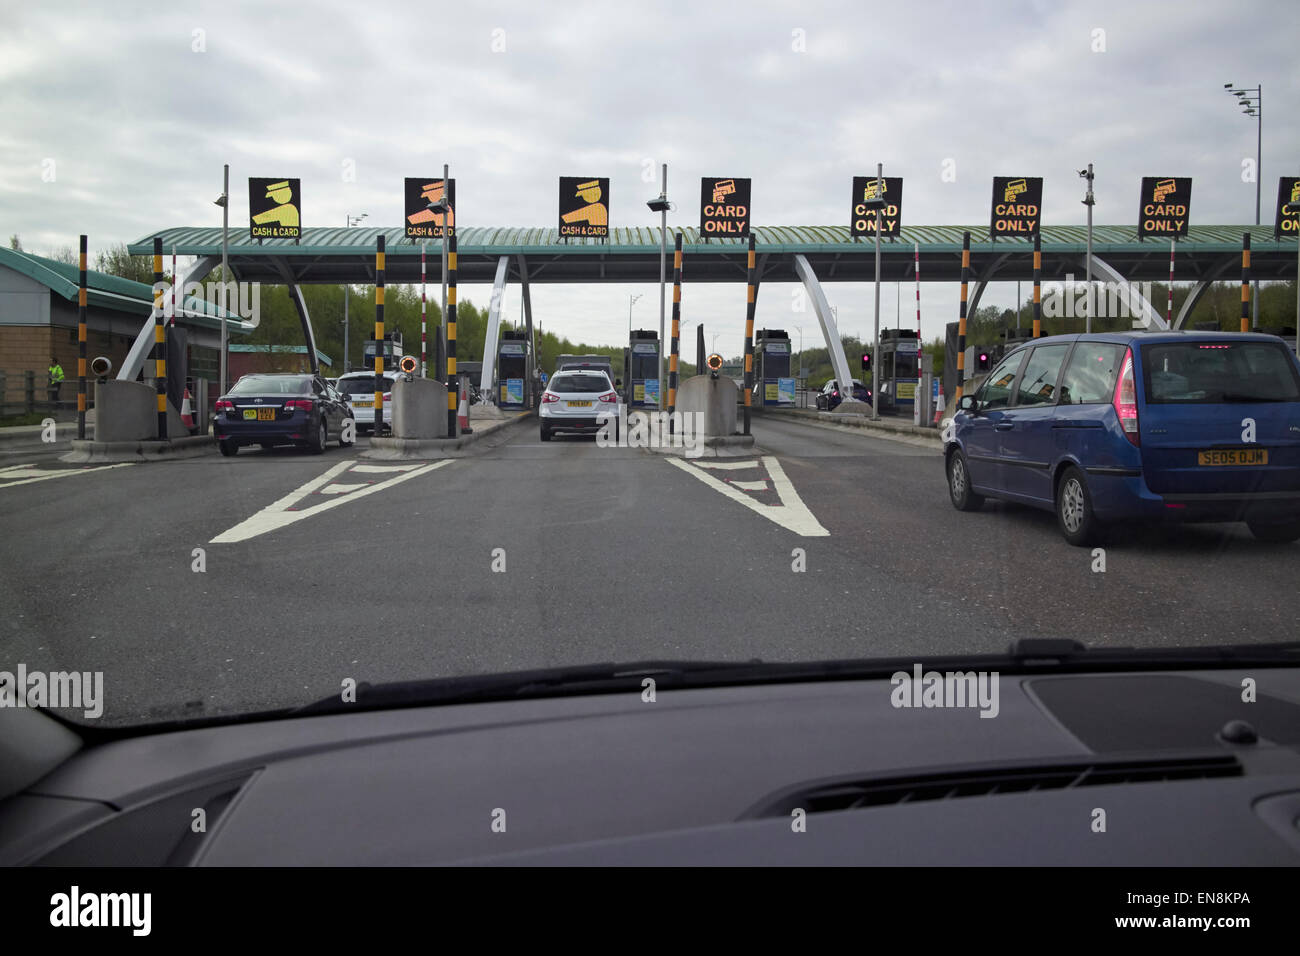 approaching M6 toll road booth plaza motorway england uk Stock Photo